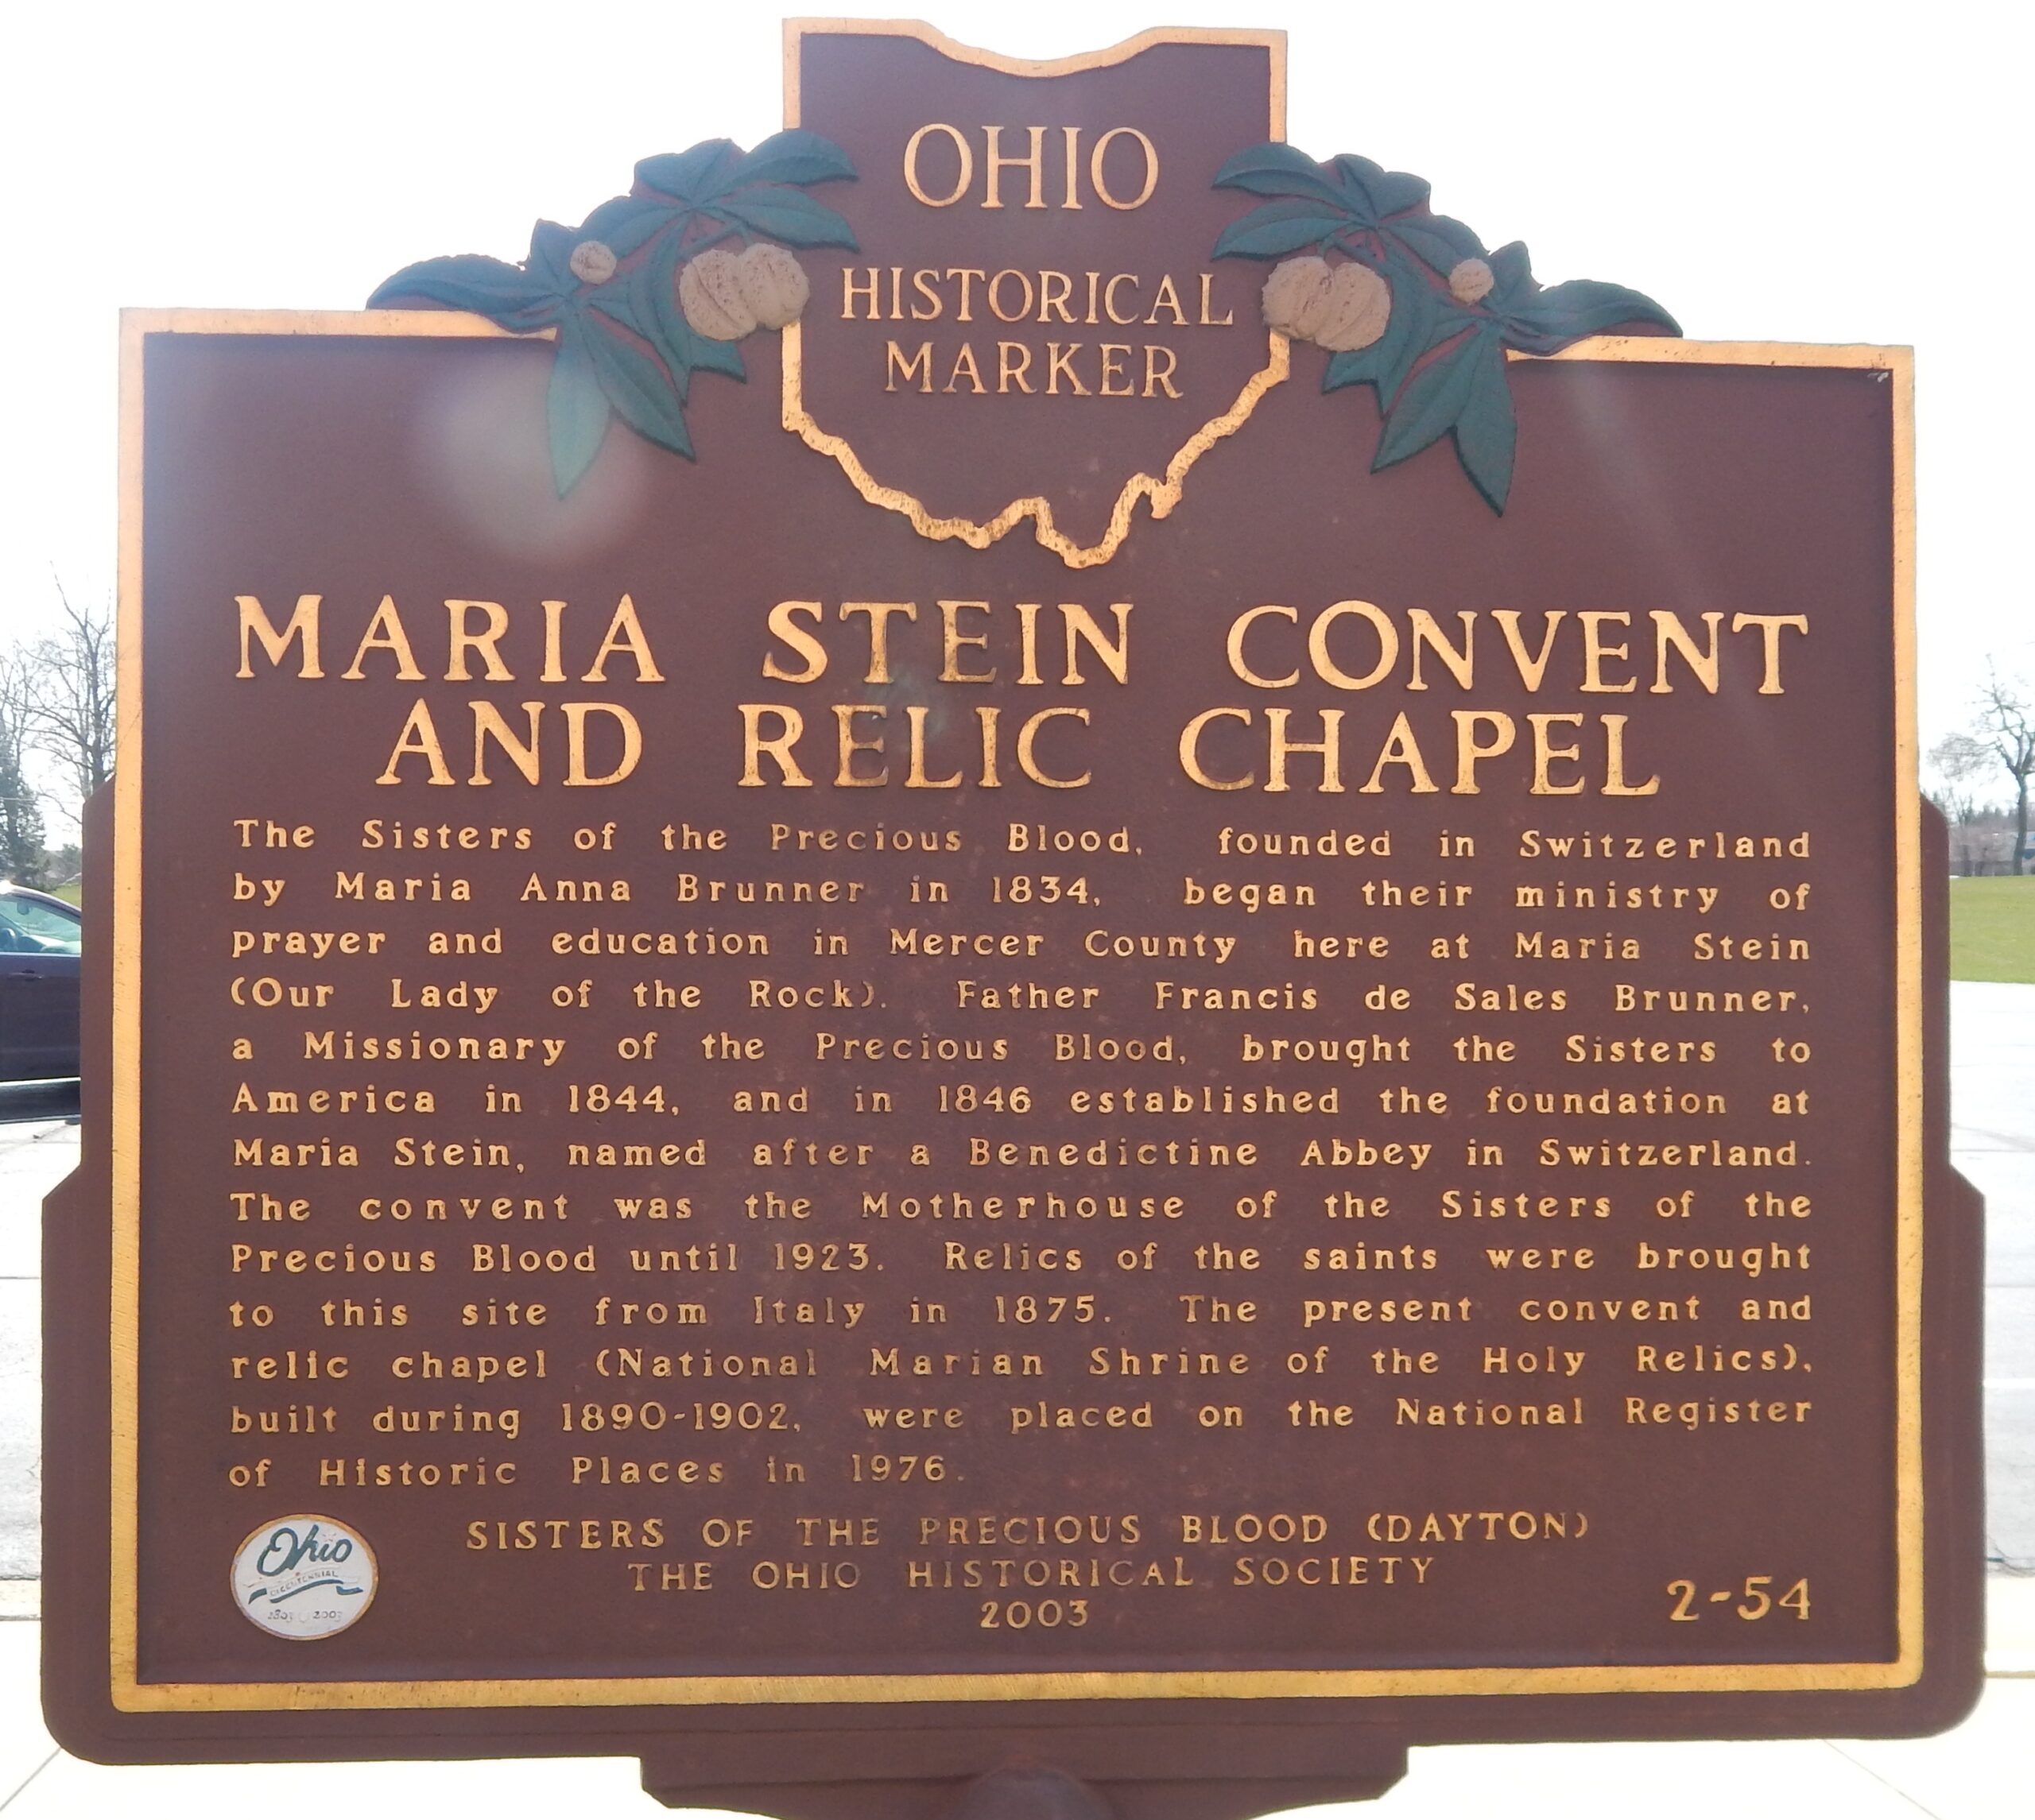 2 54 Maria Stein Convent And Relic Chapel Remarkable Ohio 3482